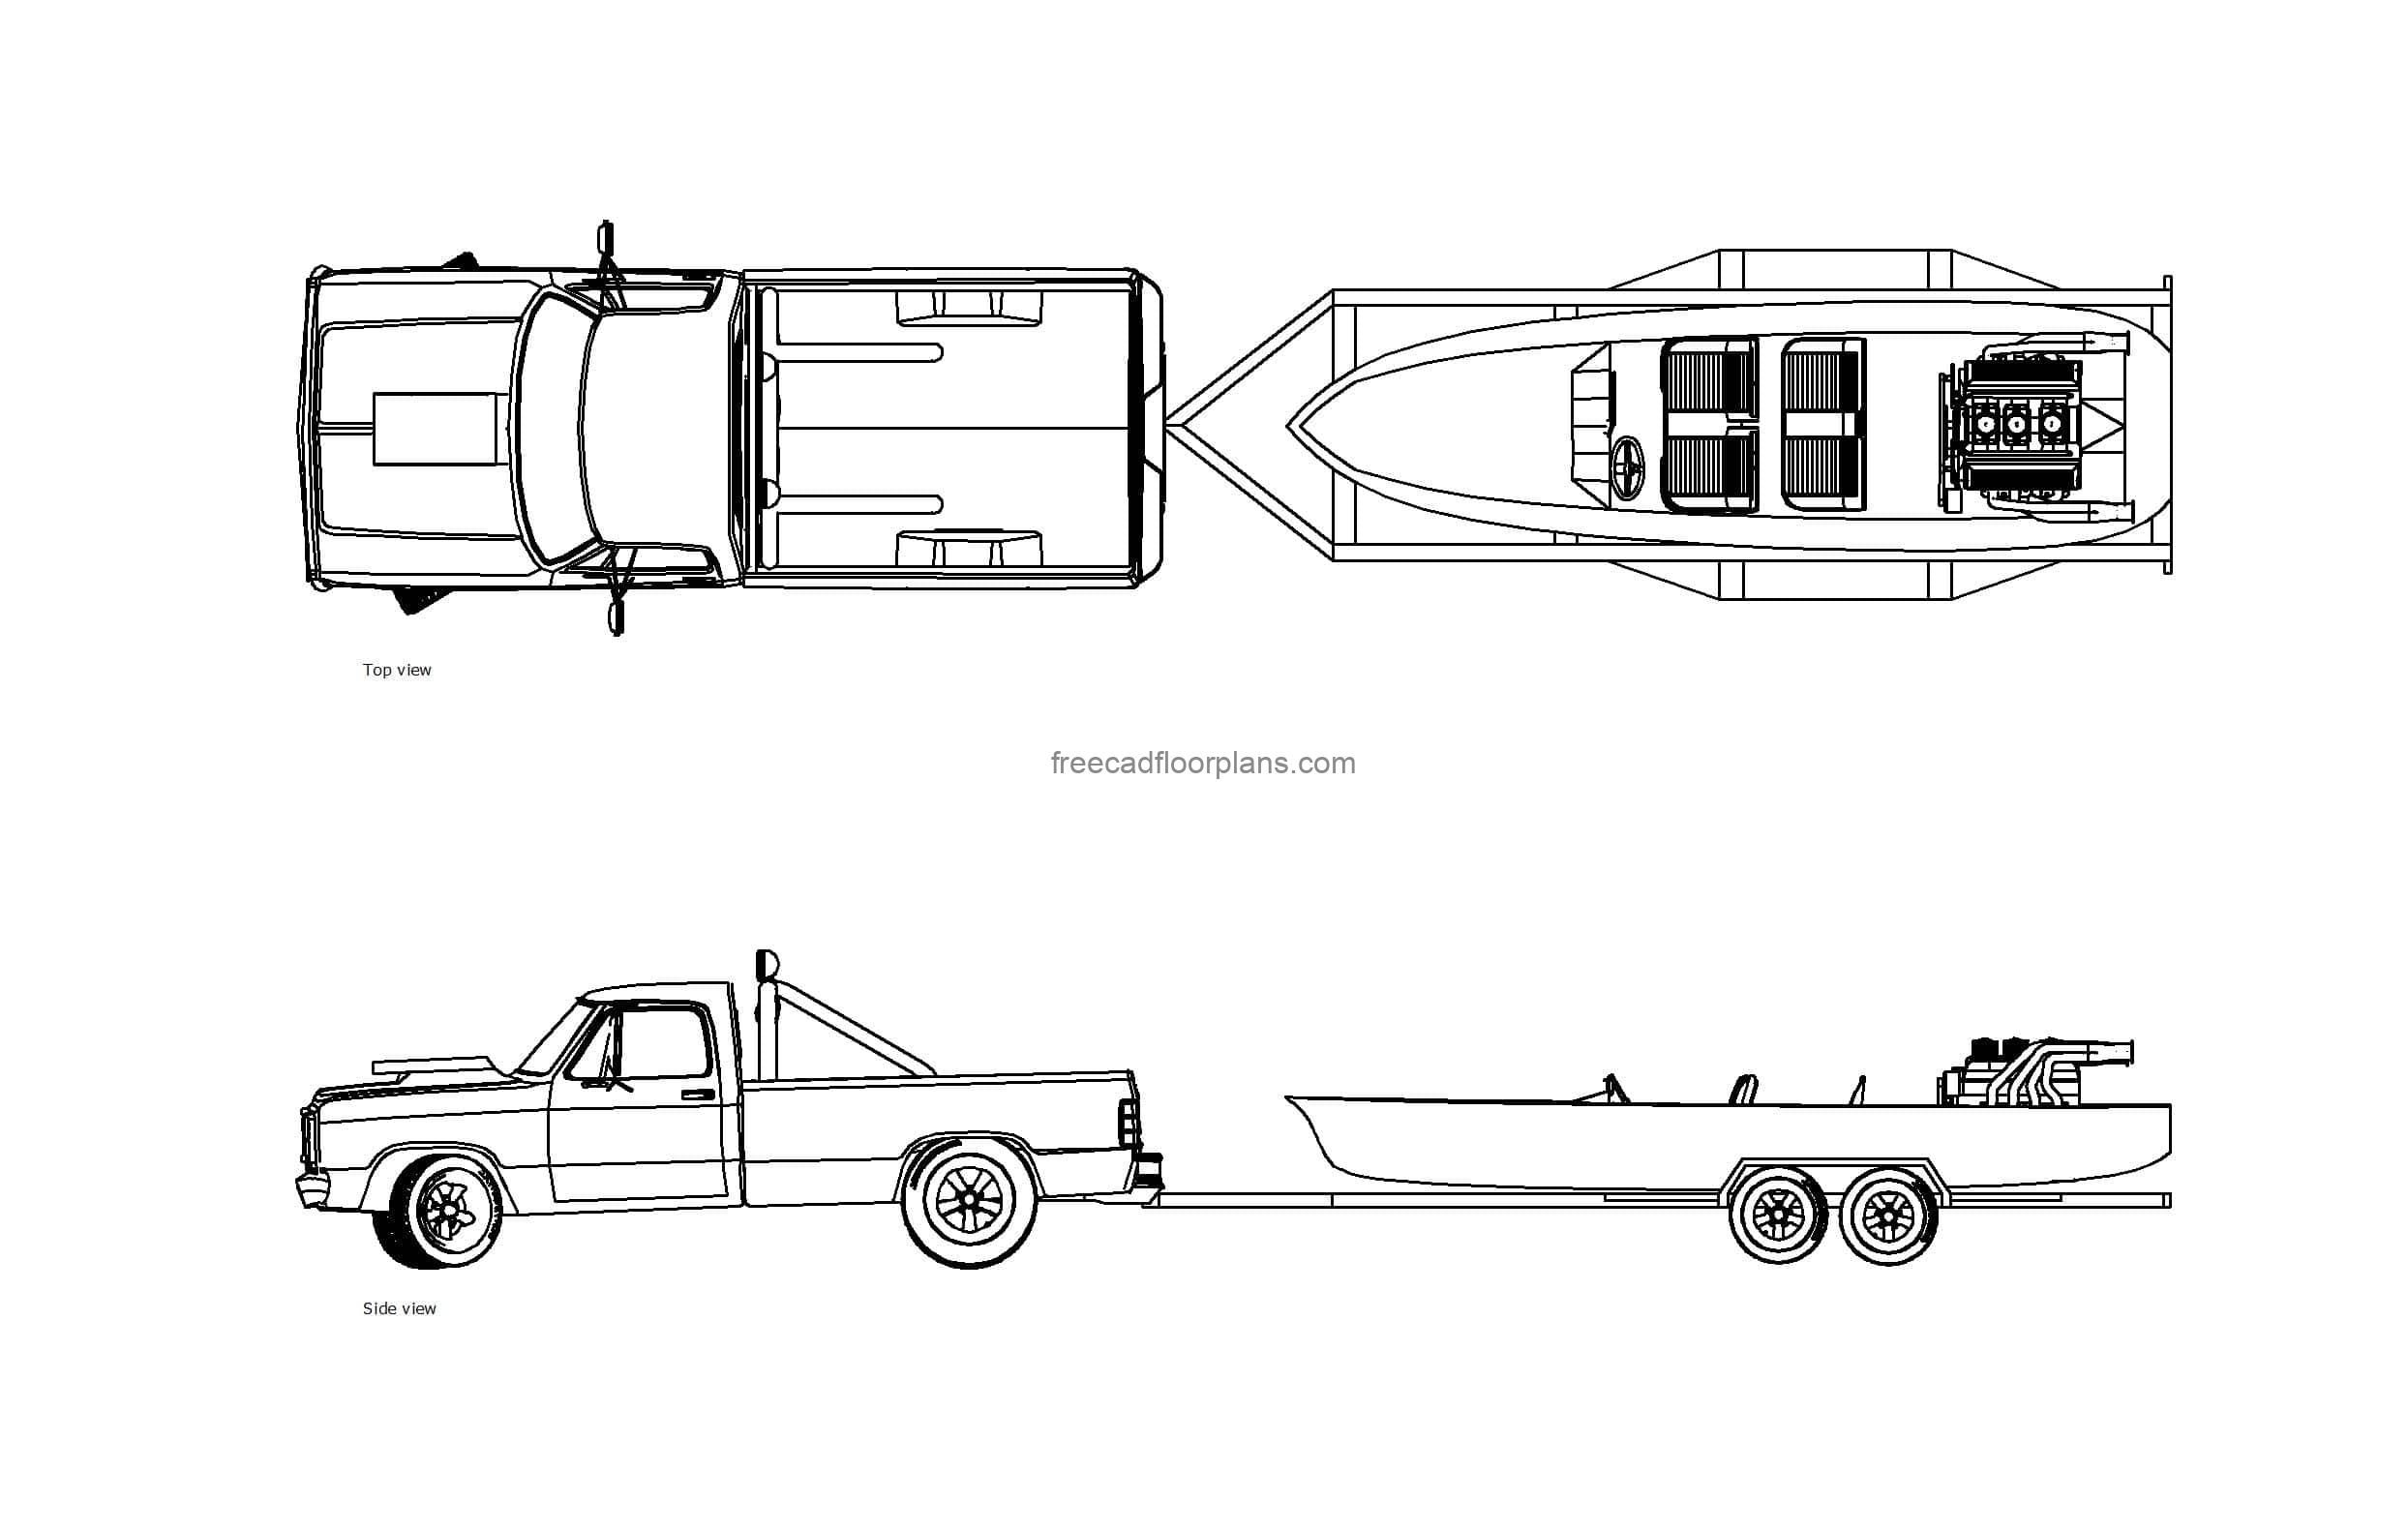 autocad drawing of a truck with boat trailer, plan and elevation 2d views, dwg file free for download